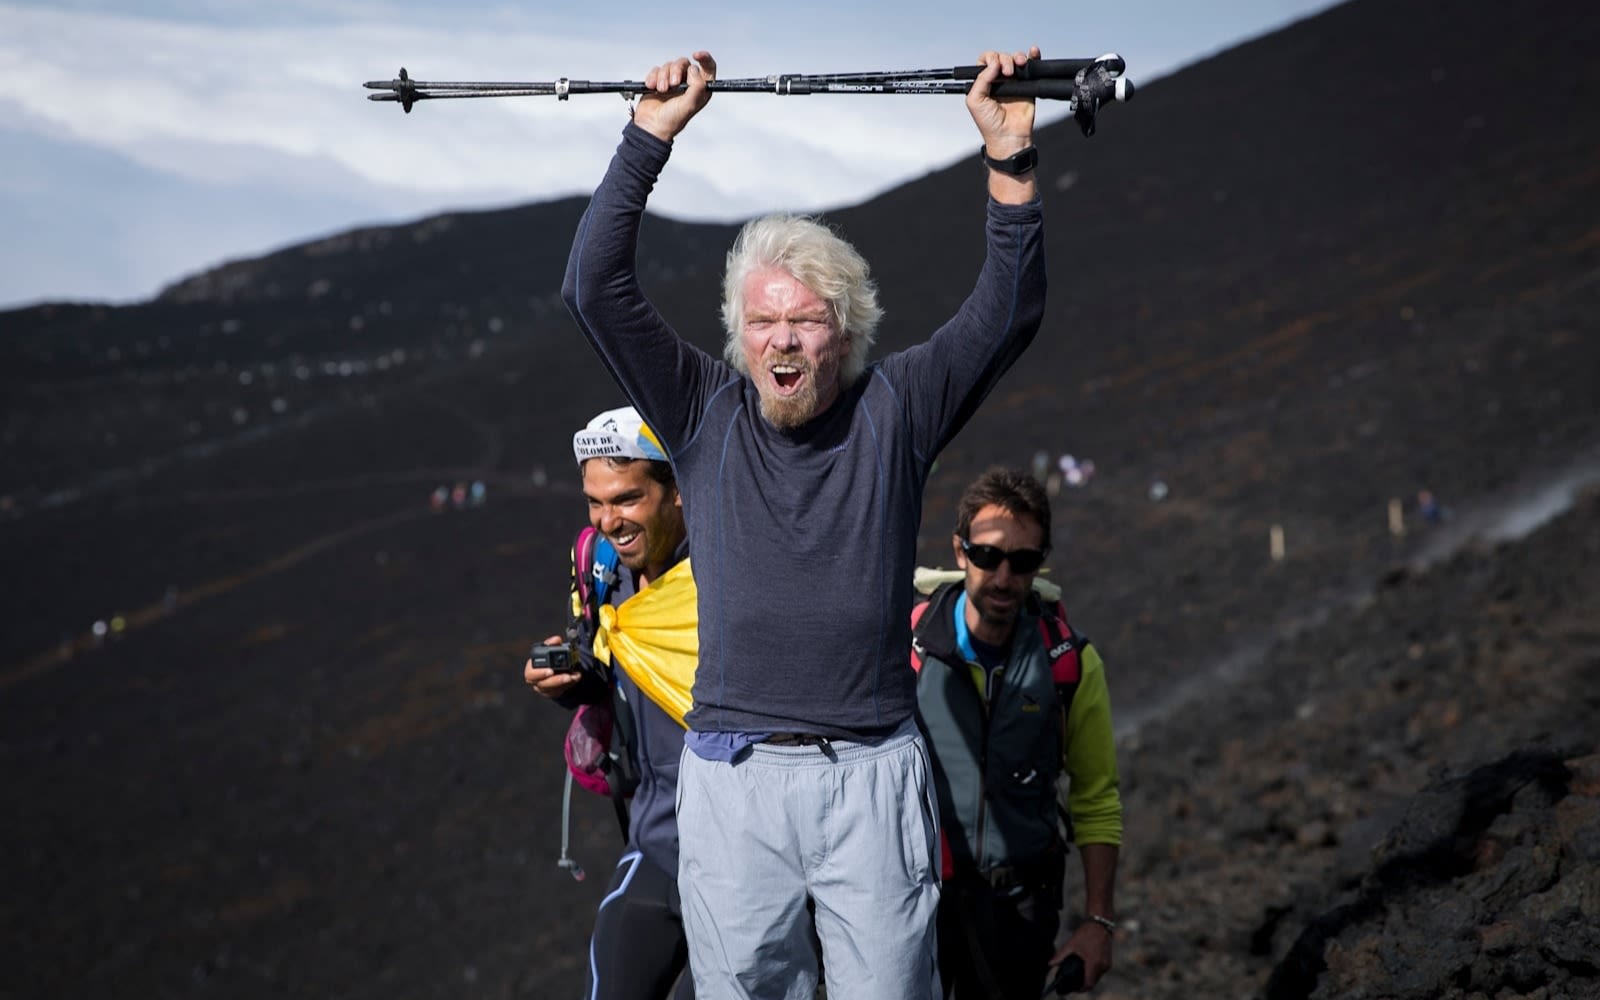 Richard Branson on a hike cheering and lifting walking poles above his head. There are two people behind him and mountains in the background